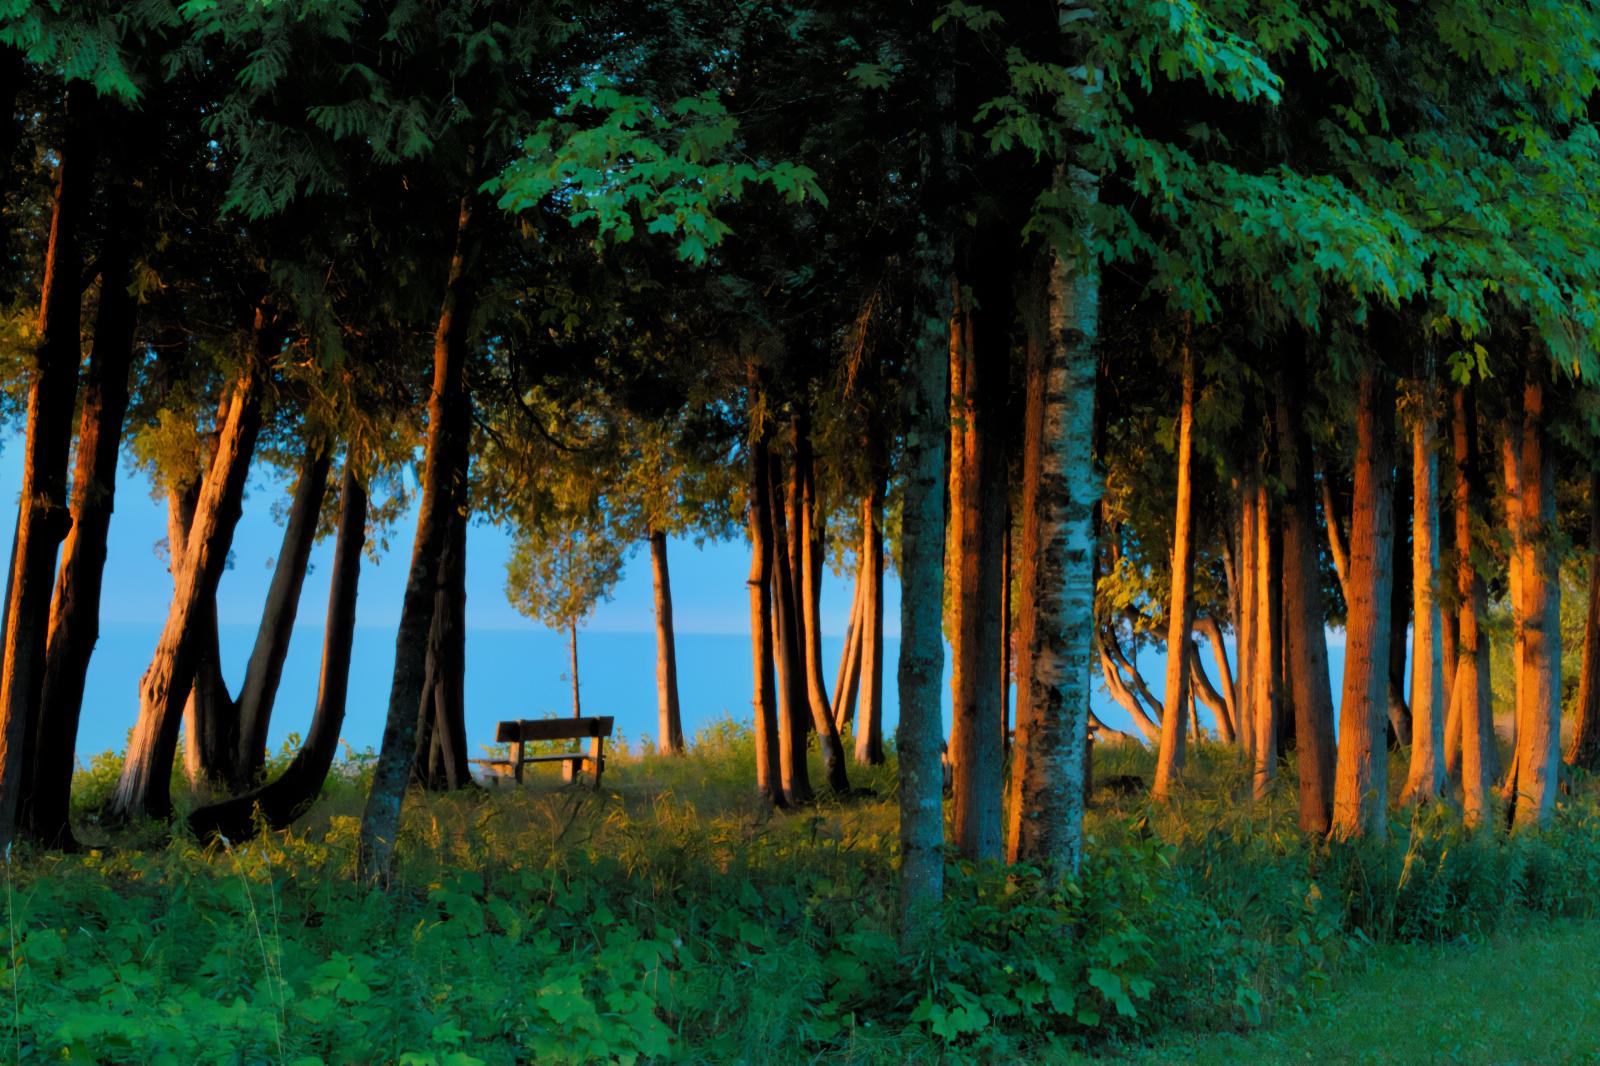 a bench situated in a crop of tree along Lake Michigan shoreline